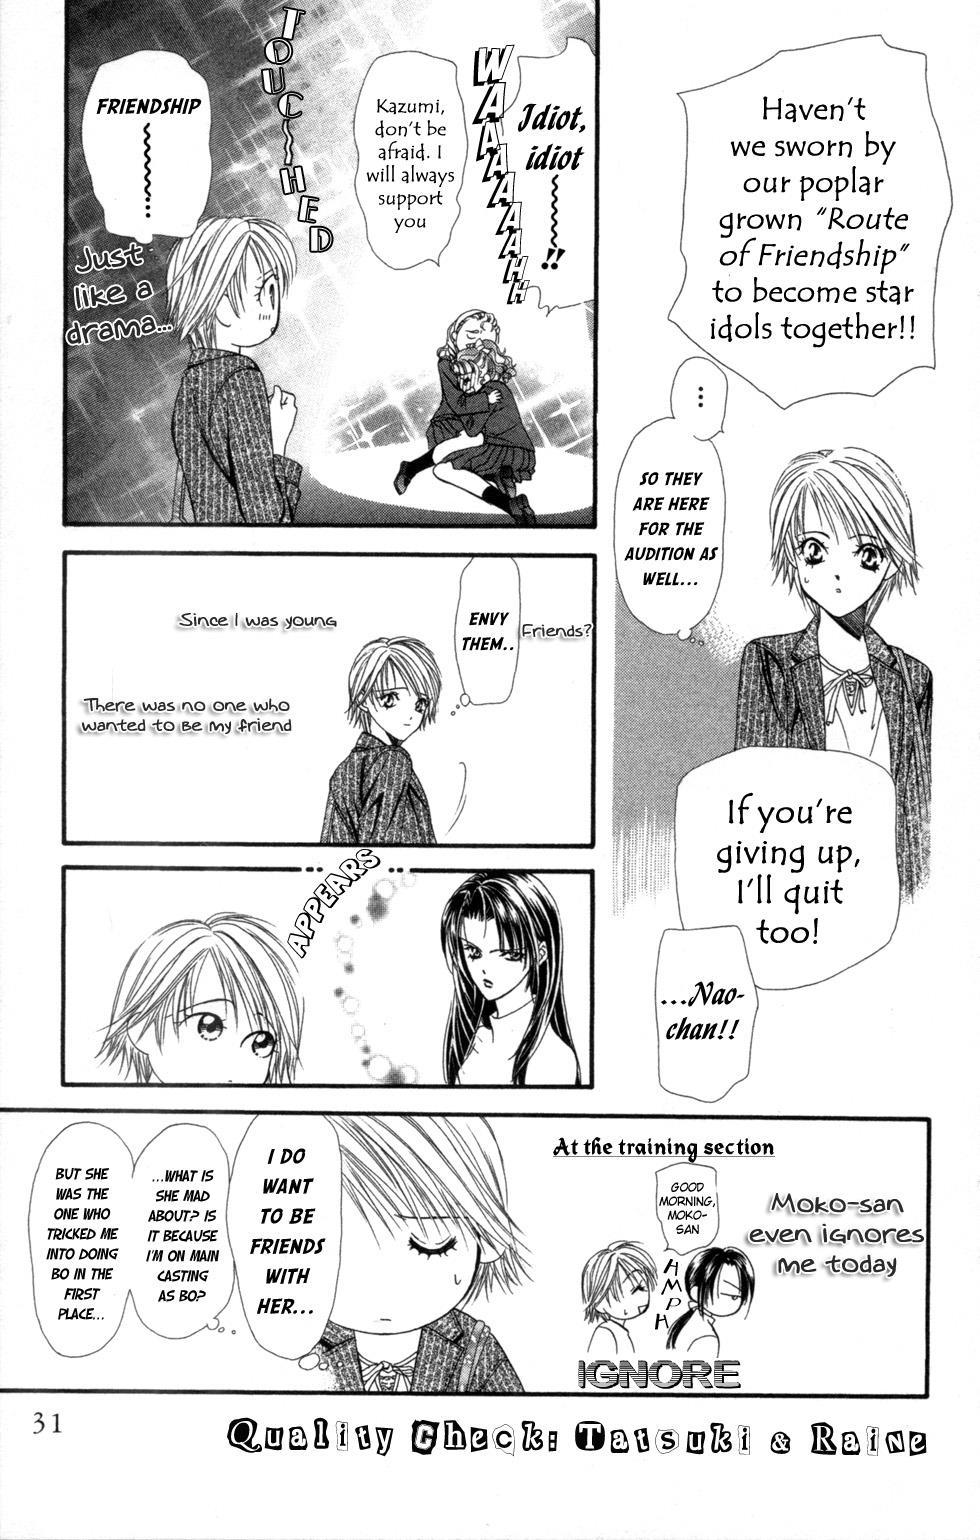 Skip Beat!, Chapter 24 The Other Side of Impact image 29